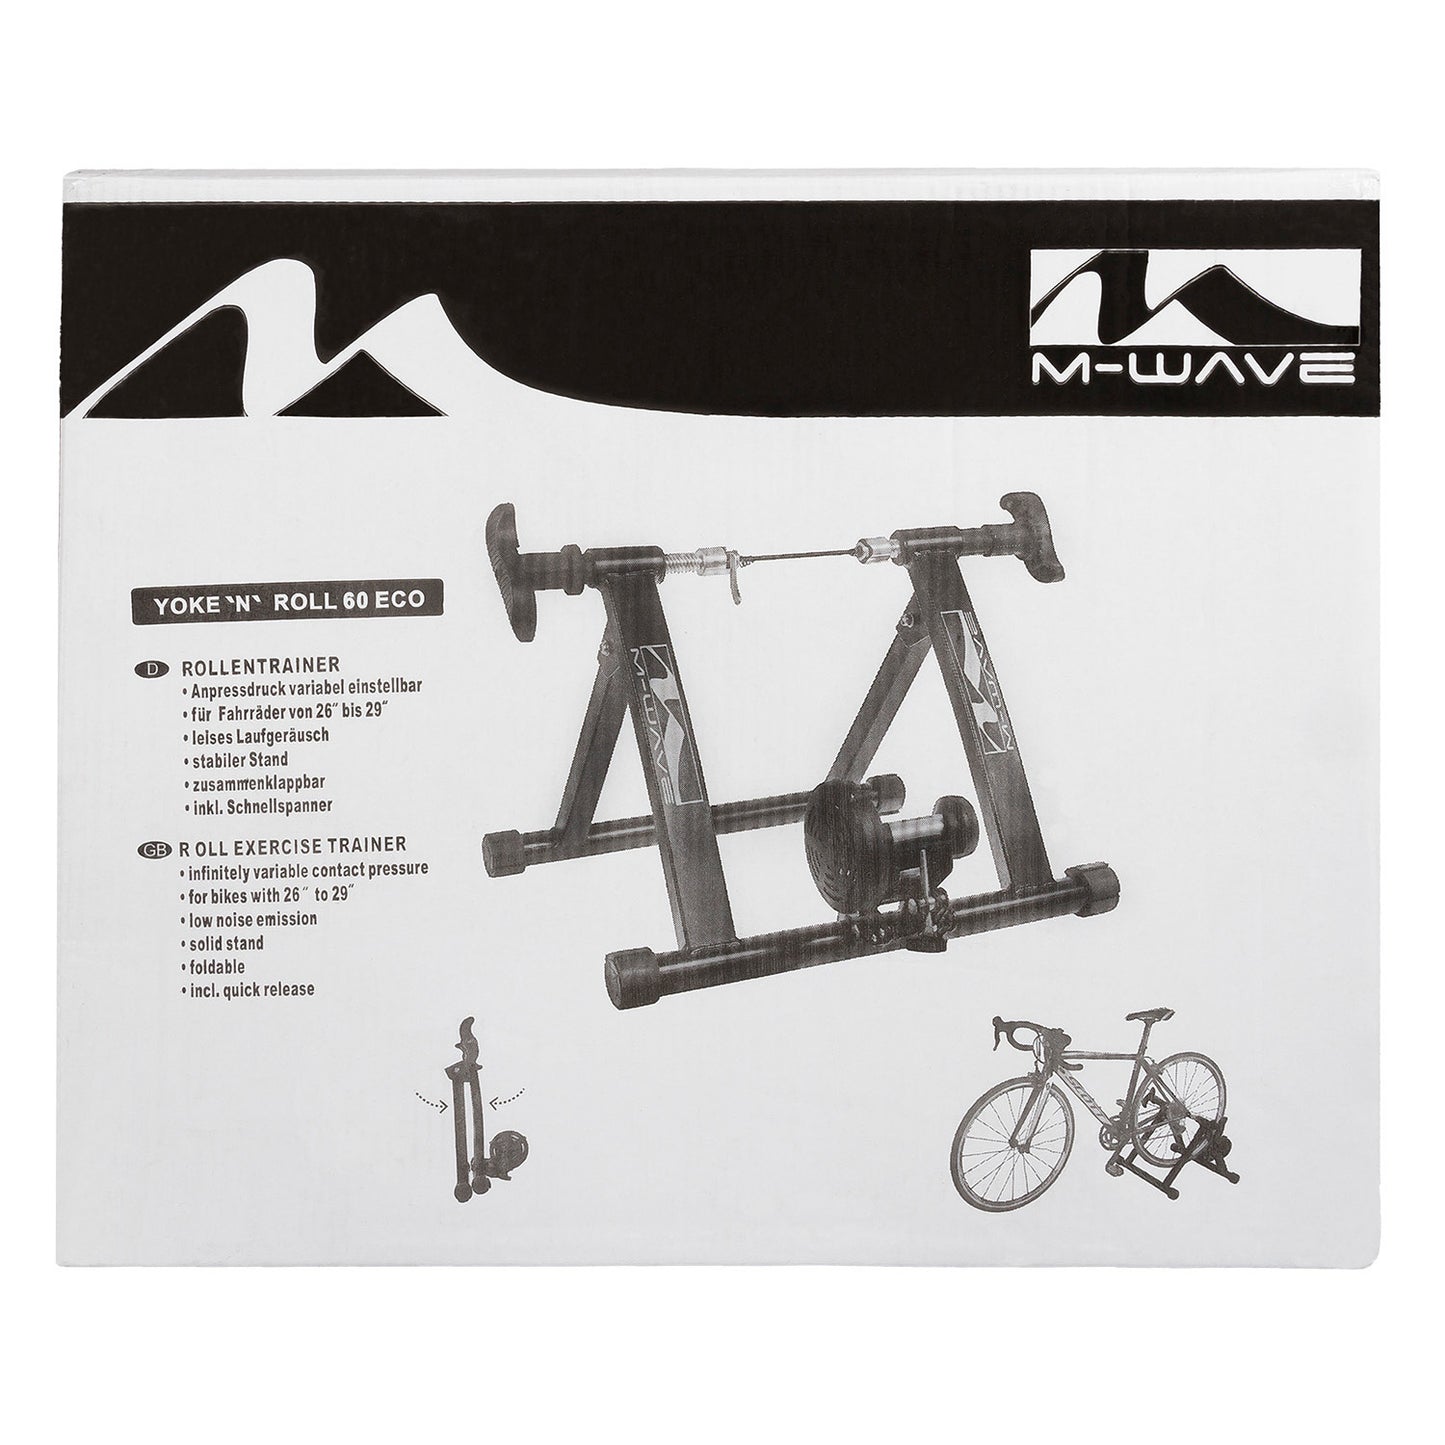 M-WAVE Yoke 'N 'Roll 60 roll exercise trainer